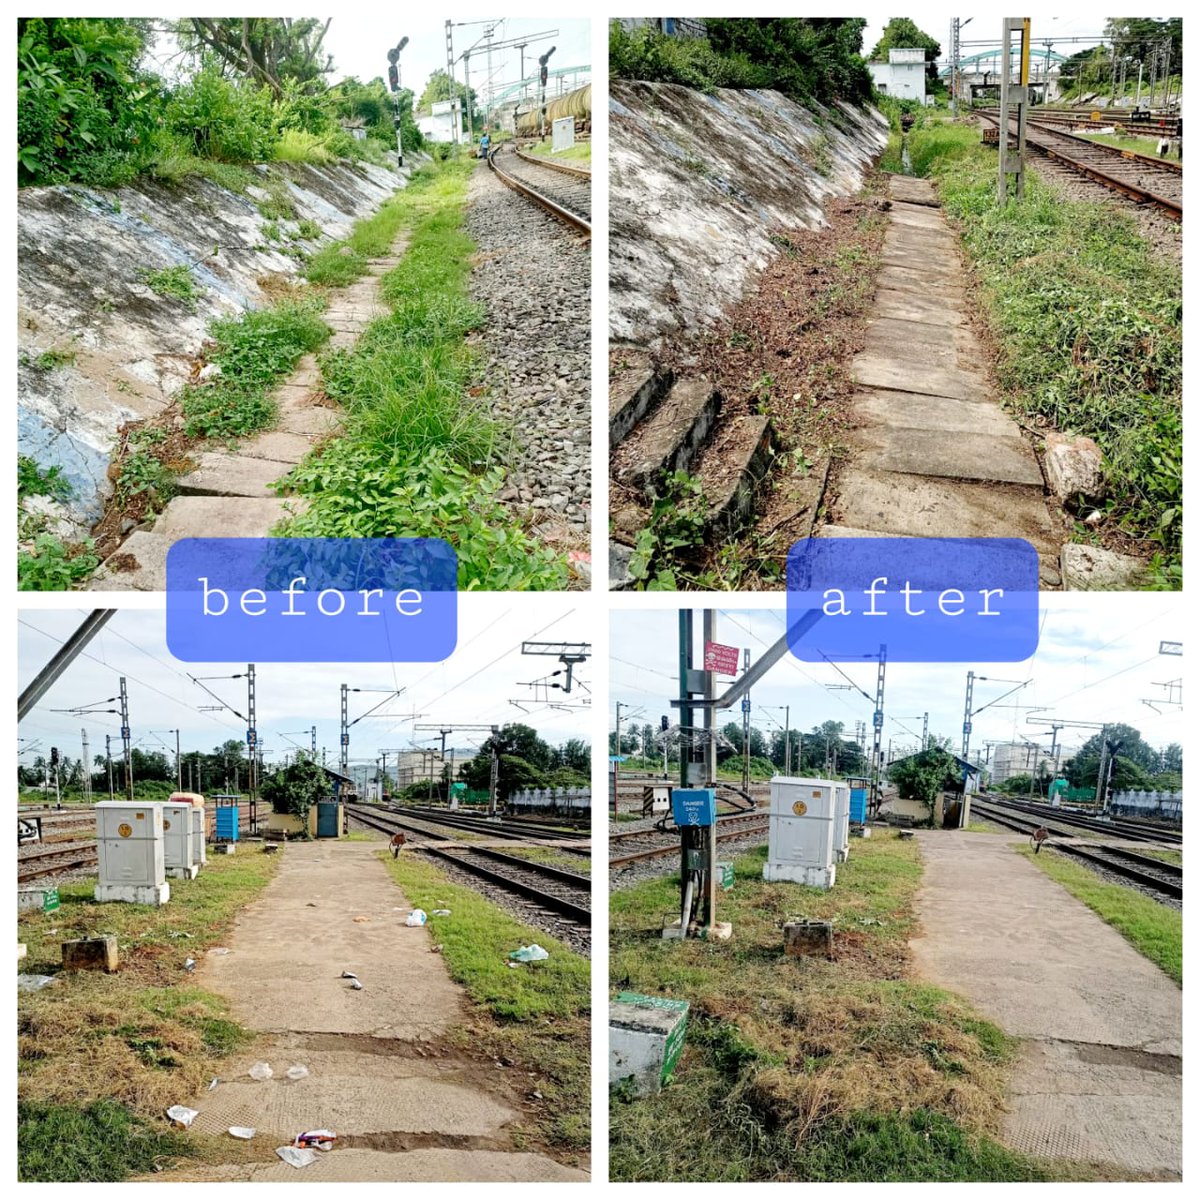 @RailMinIndia @EastCoastRail @DRMSambalpur @DRMKhurdaRoad @SCRailwayIndia @serailwaykol Mission Swachchta continued over Waltair Division.EnHM wing of WAT is on mission mode to make each station a Swachch station. Vizianagaram station looks beautiful with clean surroundings